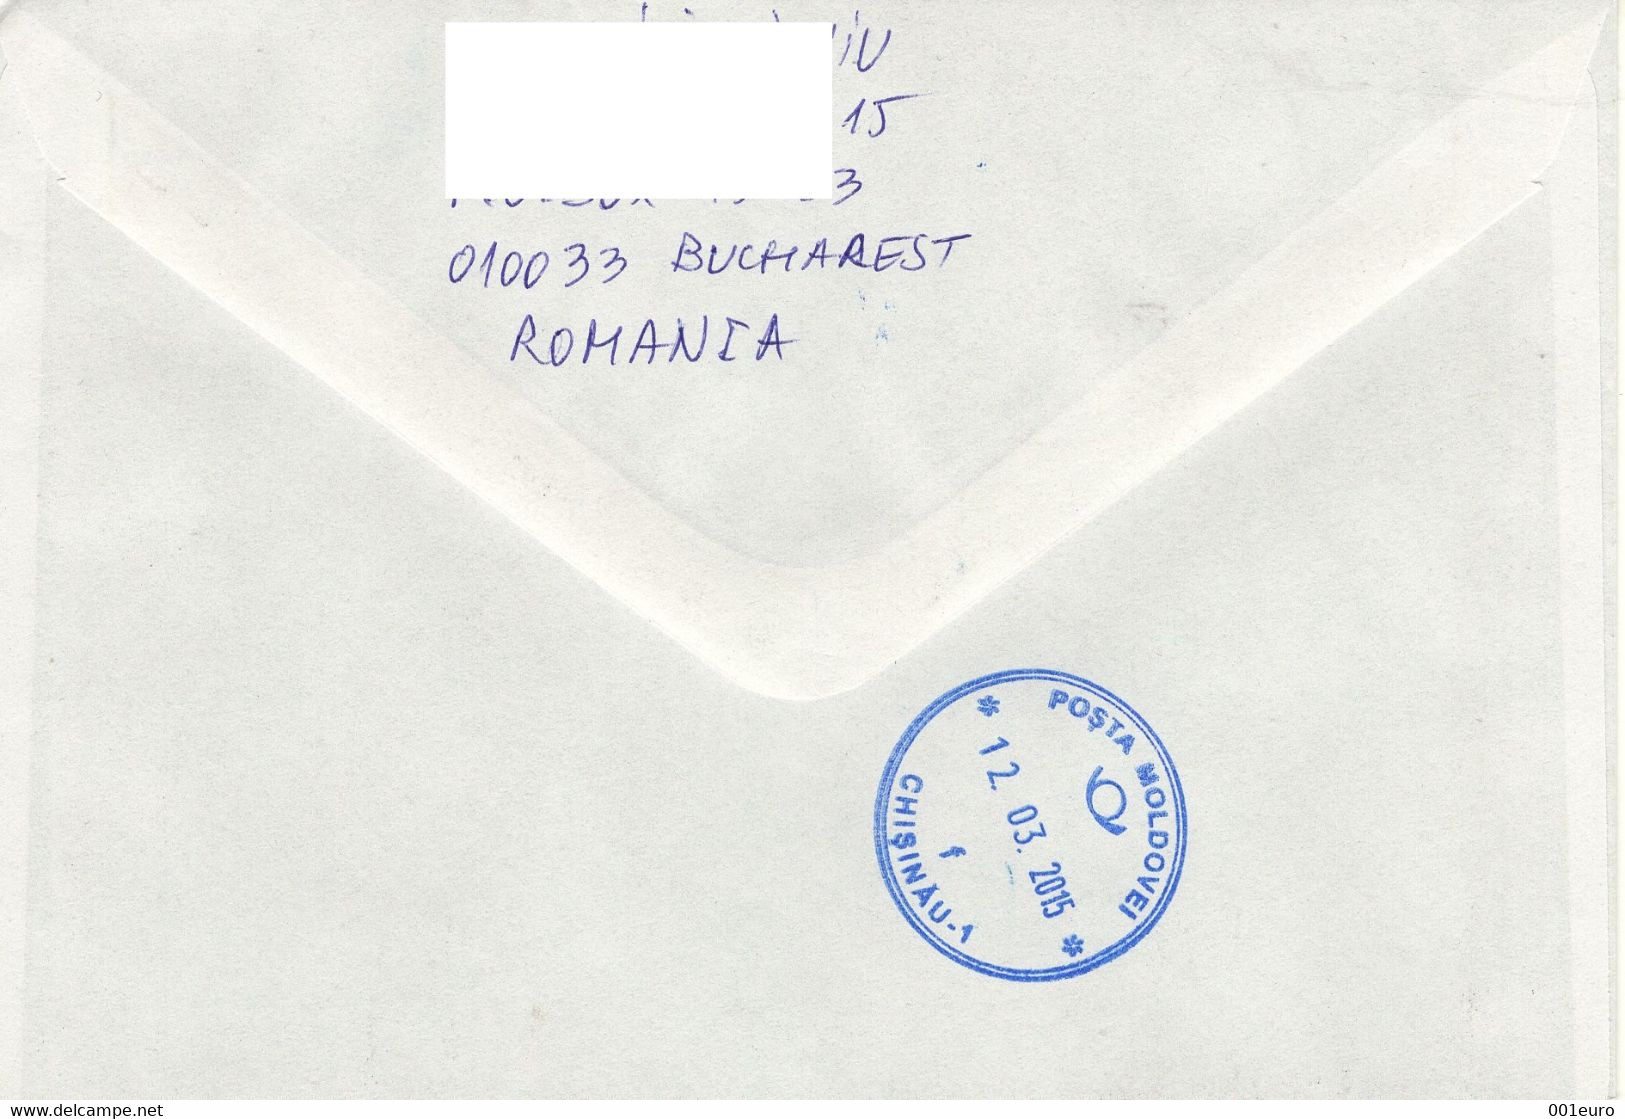 ROMANIA 2010: EUROPA - THE LETTER On REGISTERED Cover Circulated To Moldova Republic - Registered Shipping! - Storia Postale